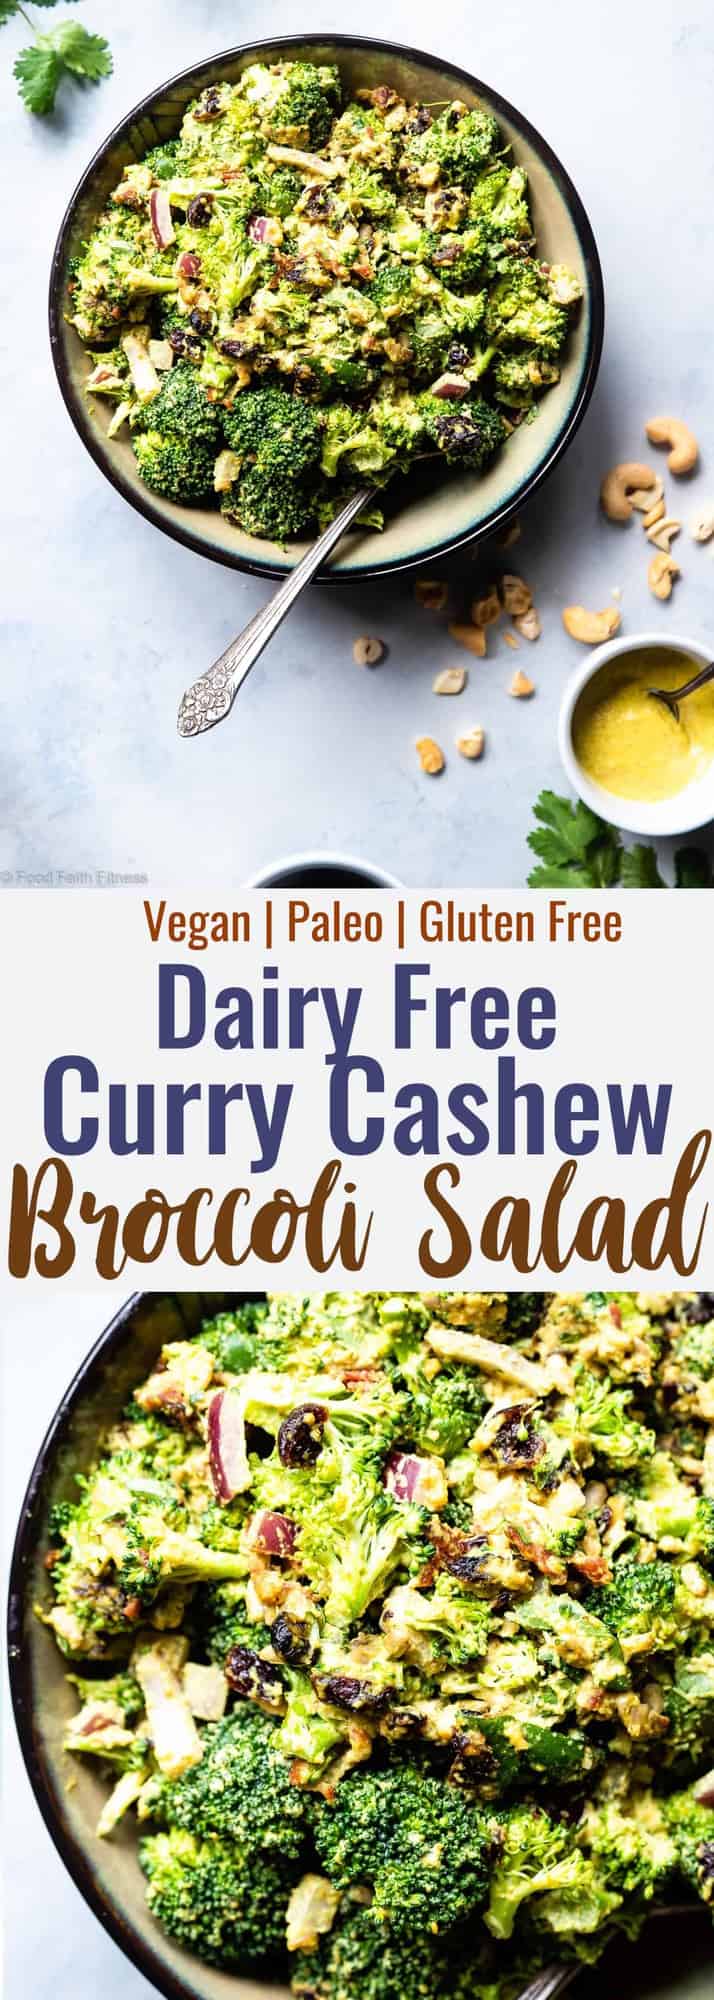 Curried Vegan Paleo Broccoli Cashew Salad -  This easy healthy broccoli salad is jazzed up with a curried cashew cream dressing. It's a quick, easy, gluten and dairy free side that's always a crowd pleaser! | #Foodfaithfitness | #Glutenfree #Paleo #Vegan #Dairyfree #Healthy 